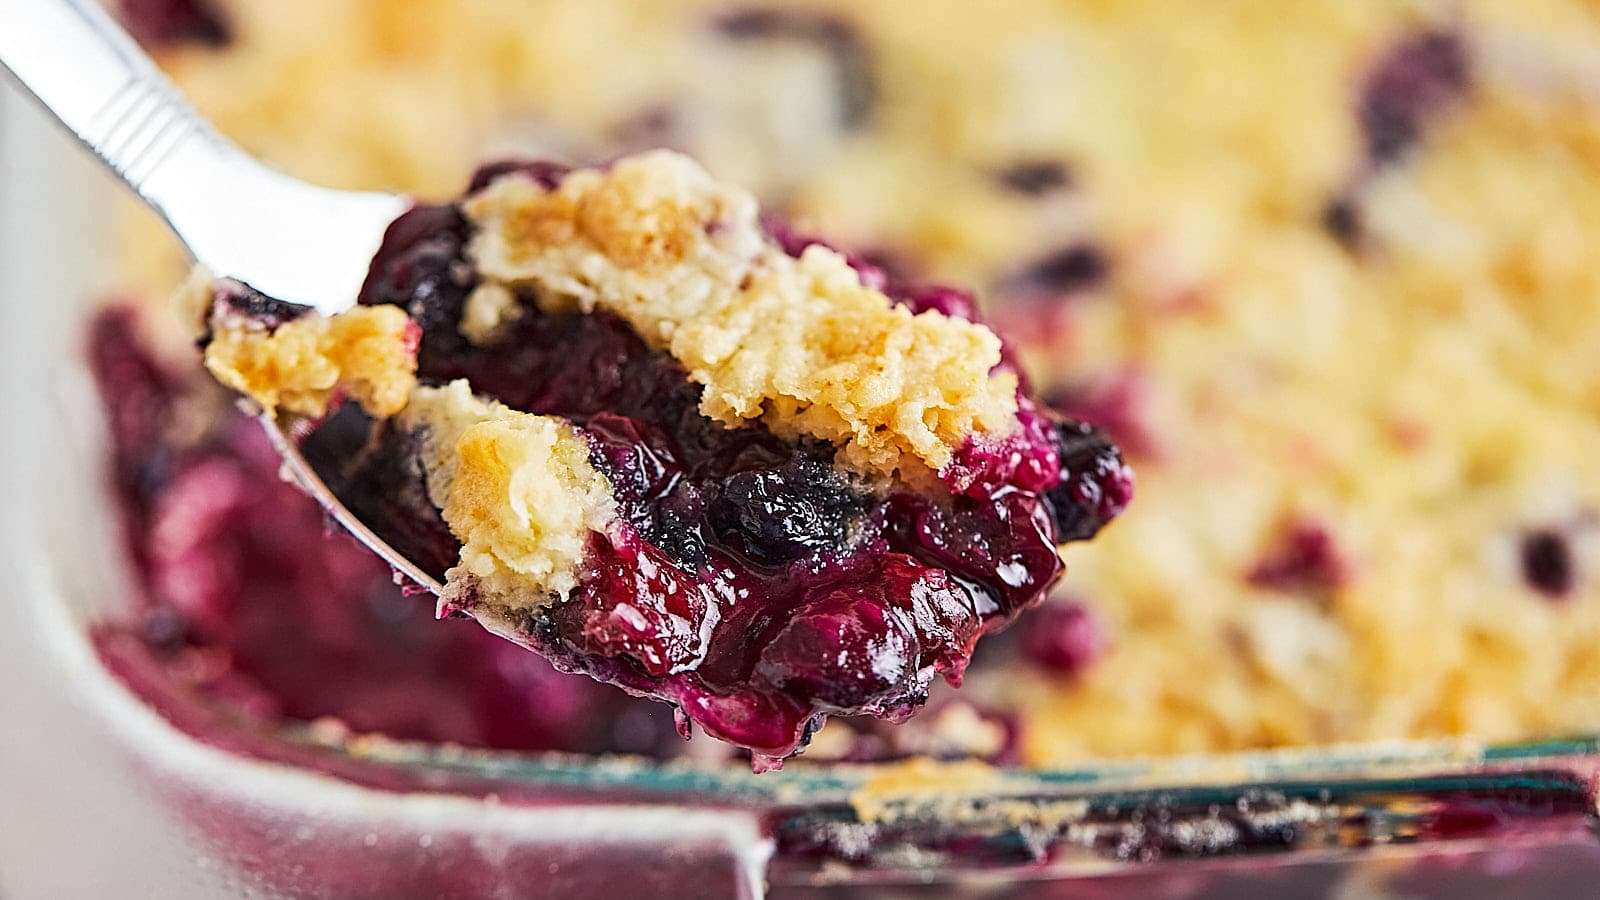 A spoonful of freshly baked Blueberry Dump Cake.